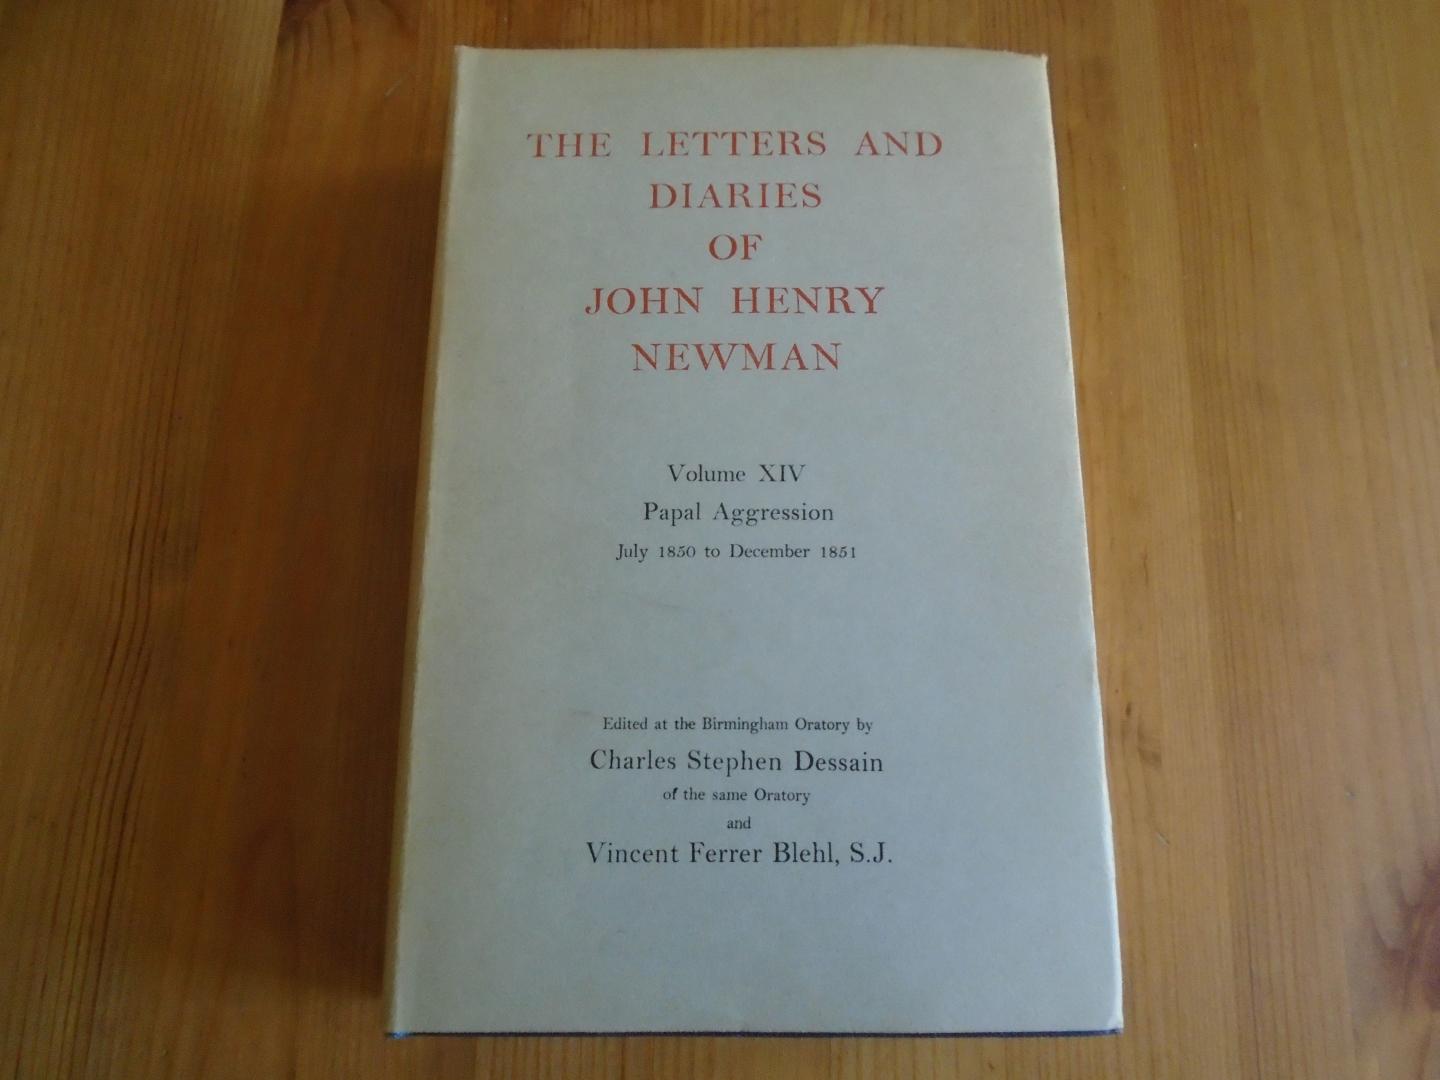 Newman, John Henry - The Letters and Diaries of John Henry Newman, Volume XIV: Papal Aggression, July 1850 to December 1851